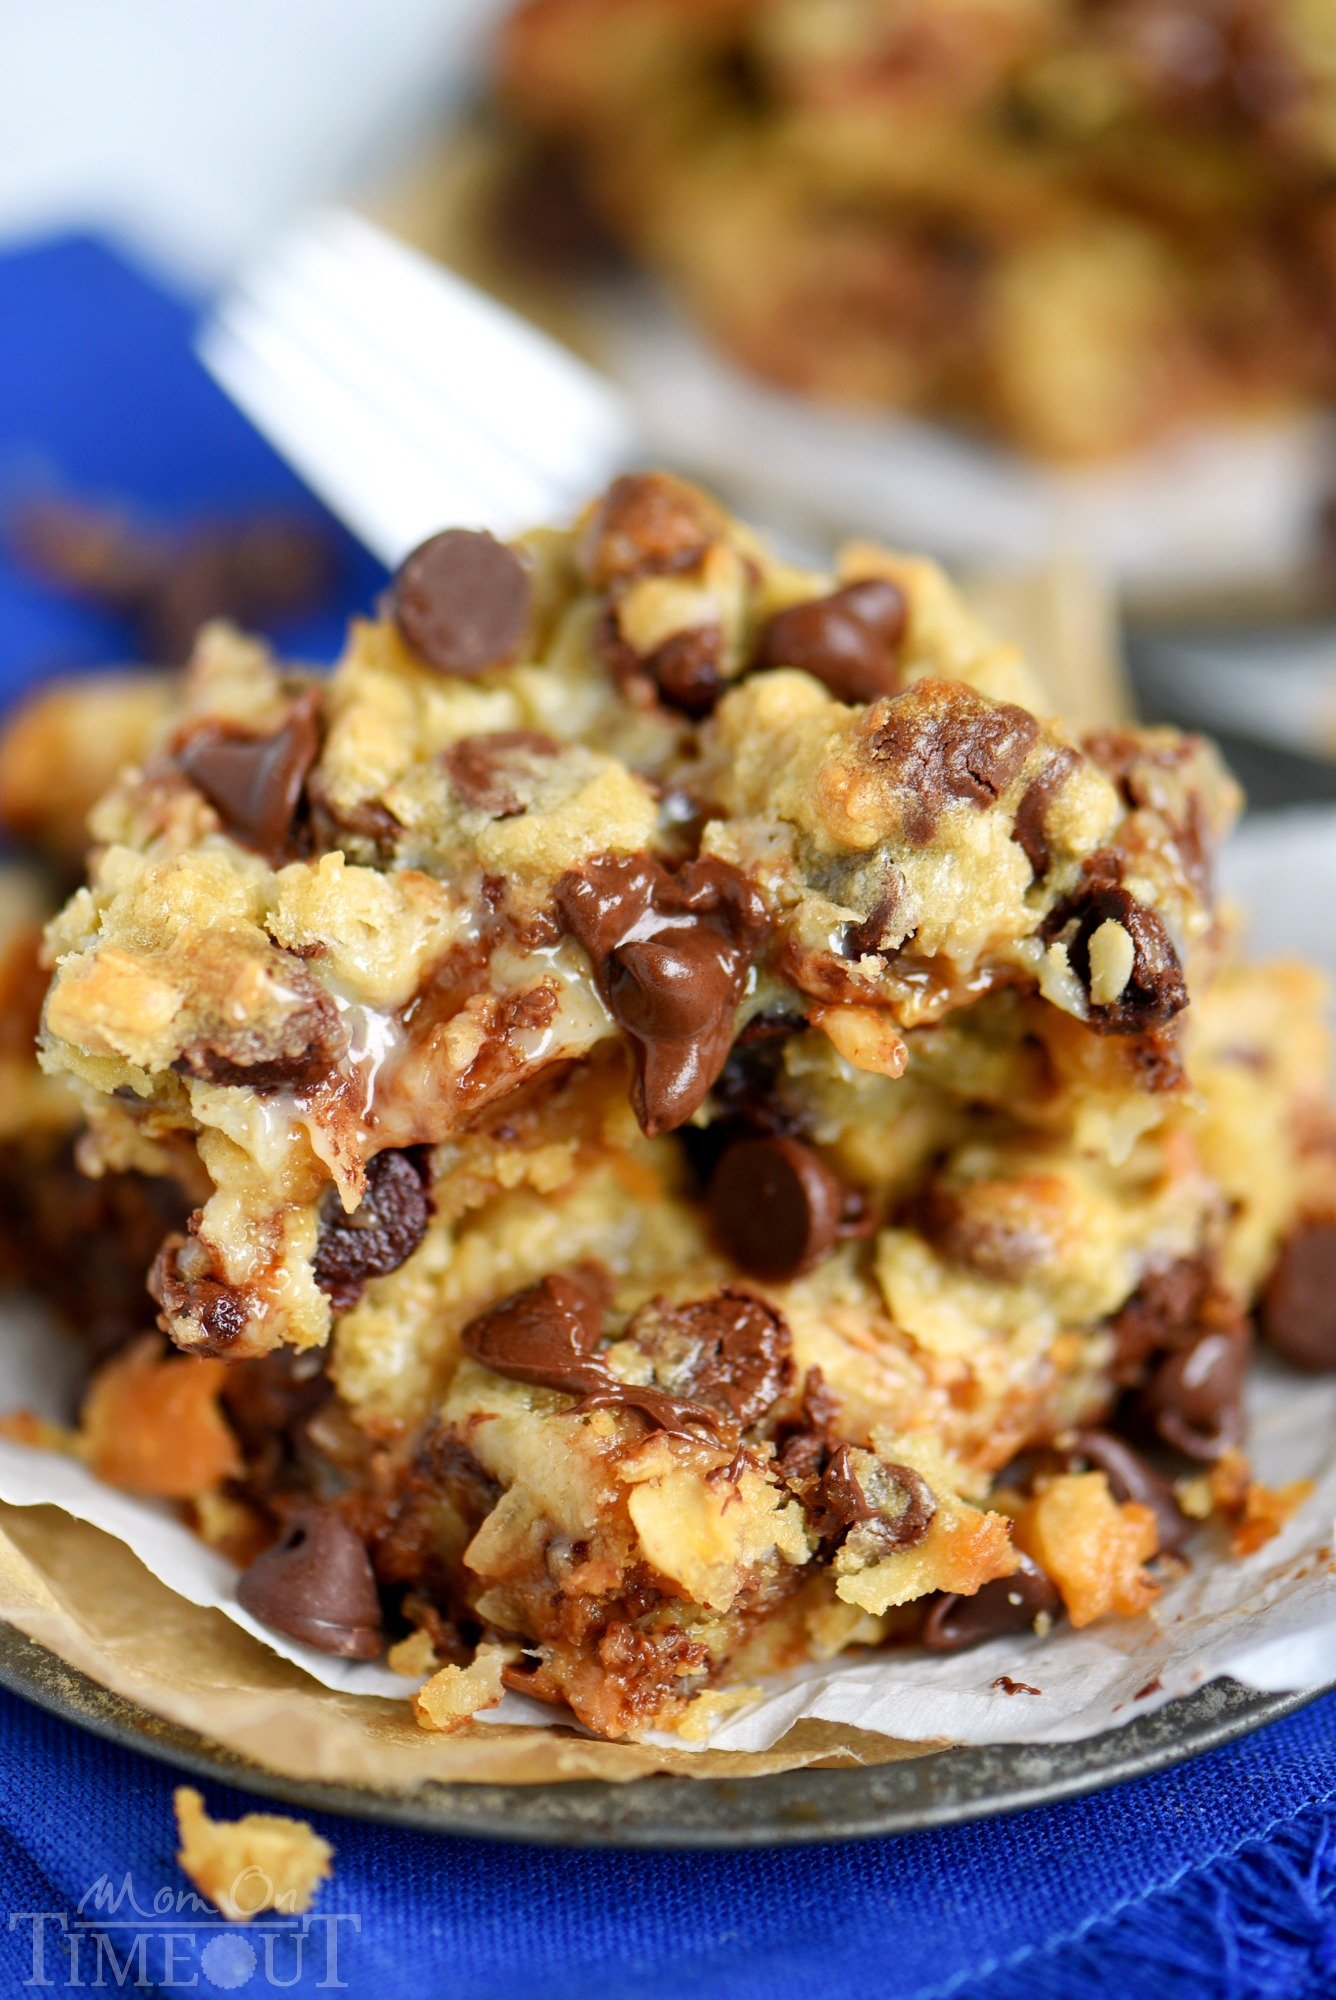 Coconut Toffee Chocolate Chip Cookie Bars are impossible to resist with their ooey, gooey center and incredible flavor! Great for parties and potlucks! // Mom On Timeout